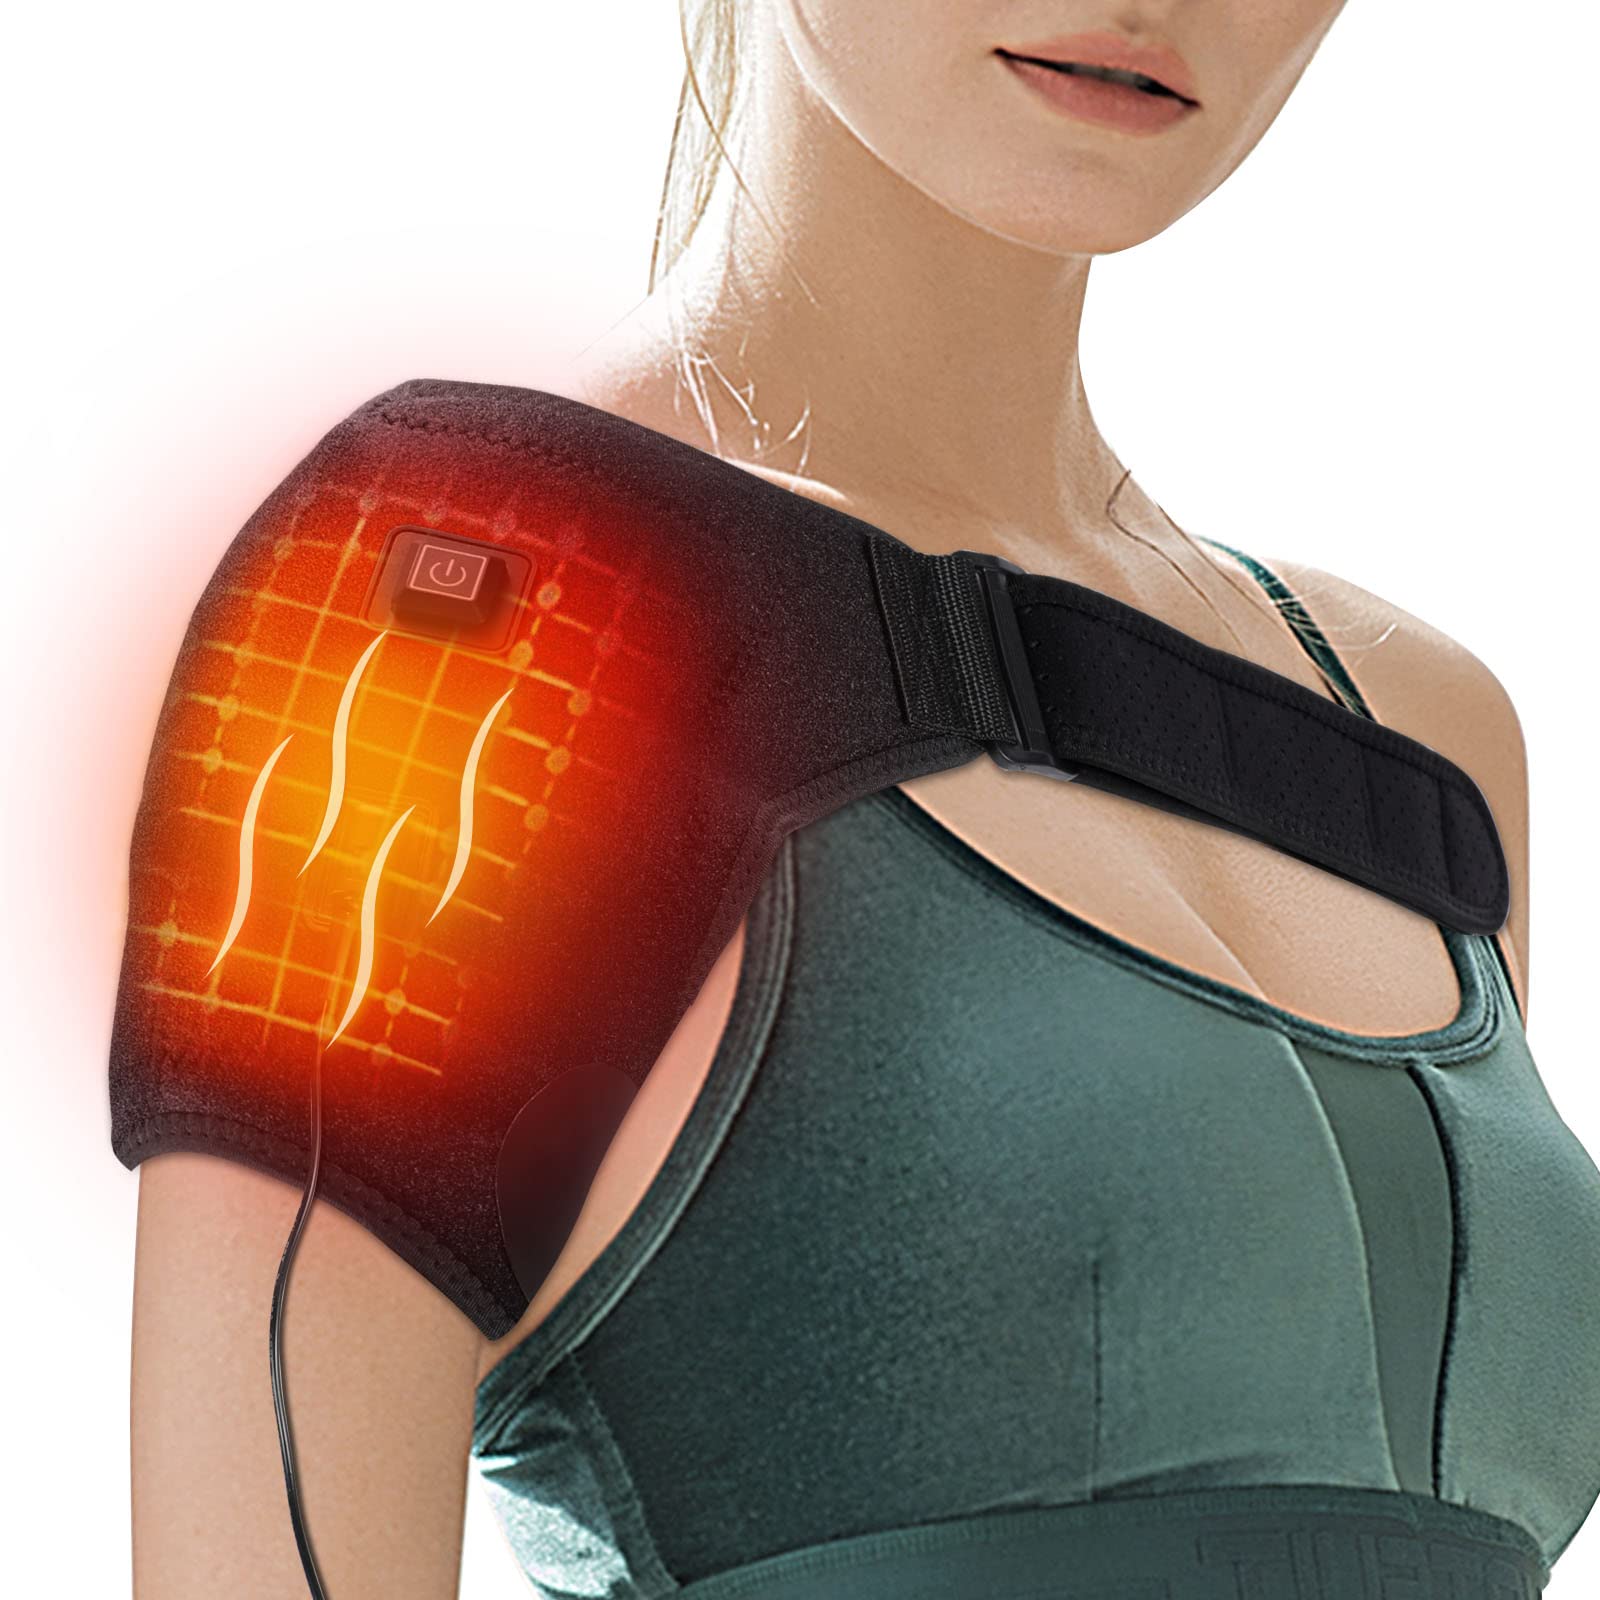 🎄CHRISTMAS PRE-SALE Heating Pad for Shoulder-40%OFF 